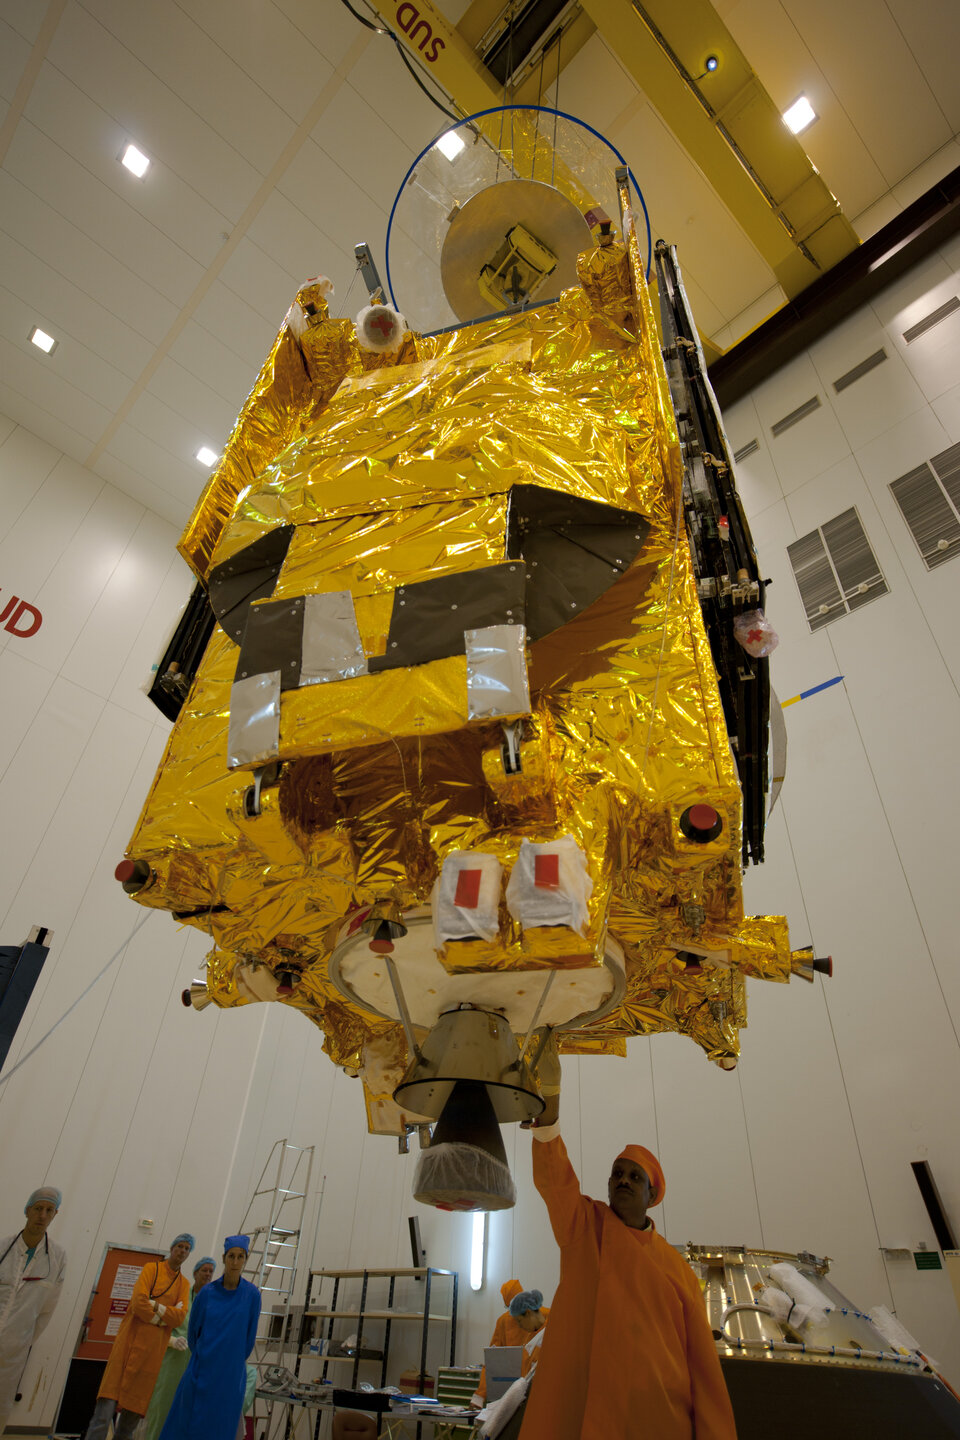 Hylas-1 during integration for launch